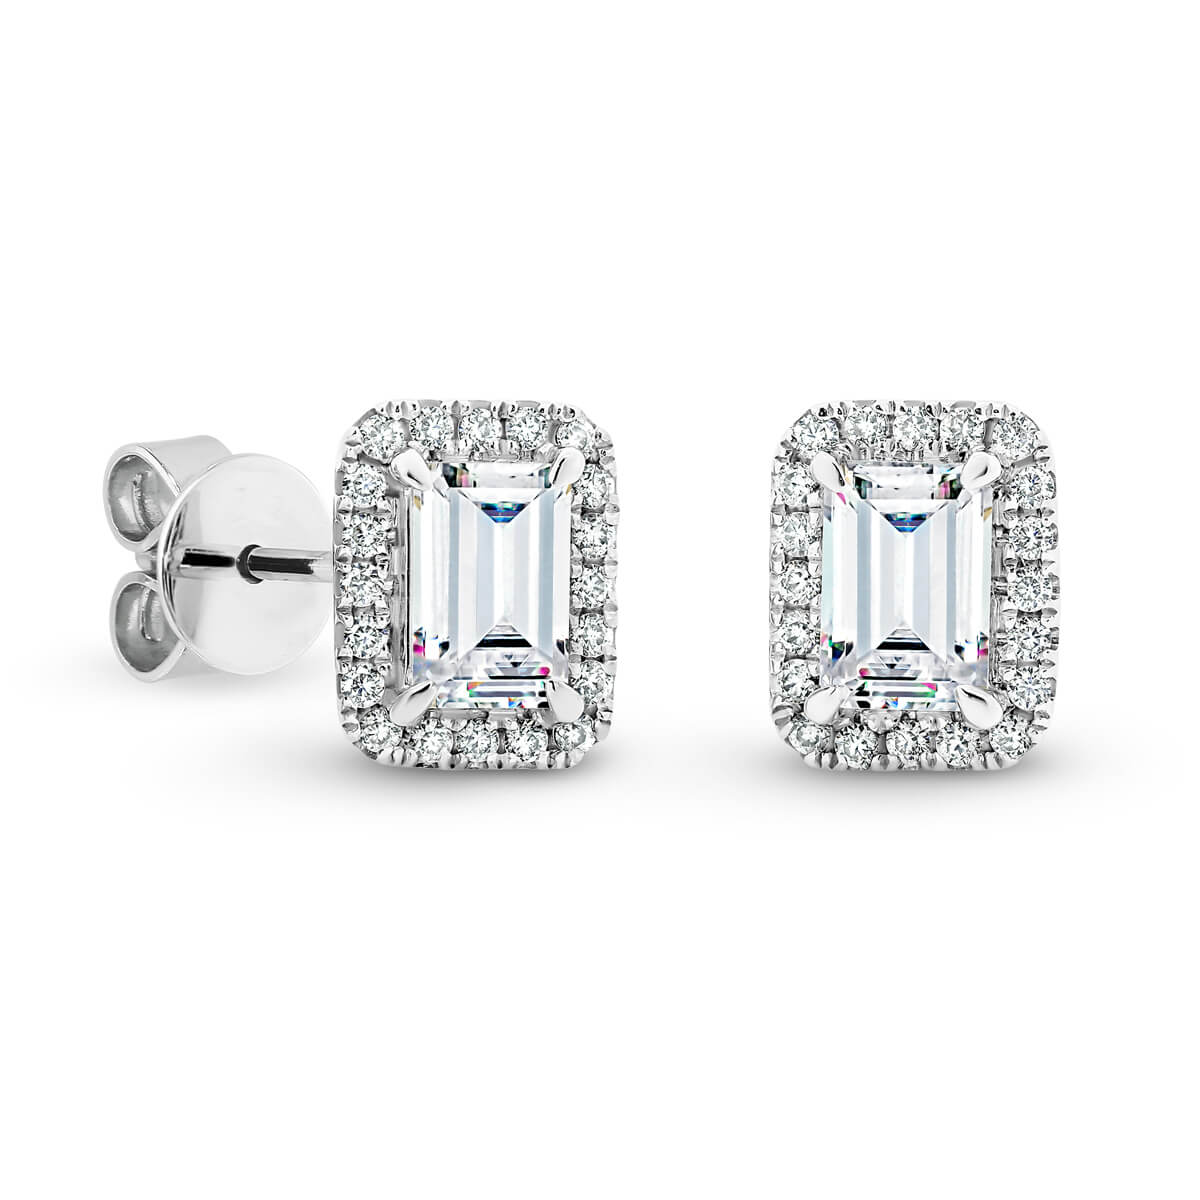 Tiana 6X4 Emerald Cut Moissanite Stud Earrings With Halo